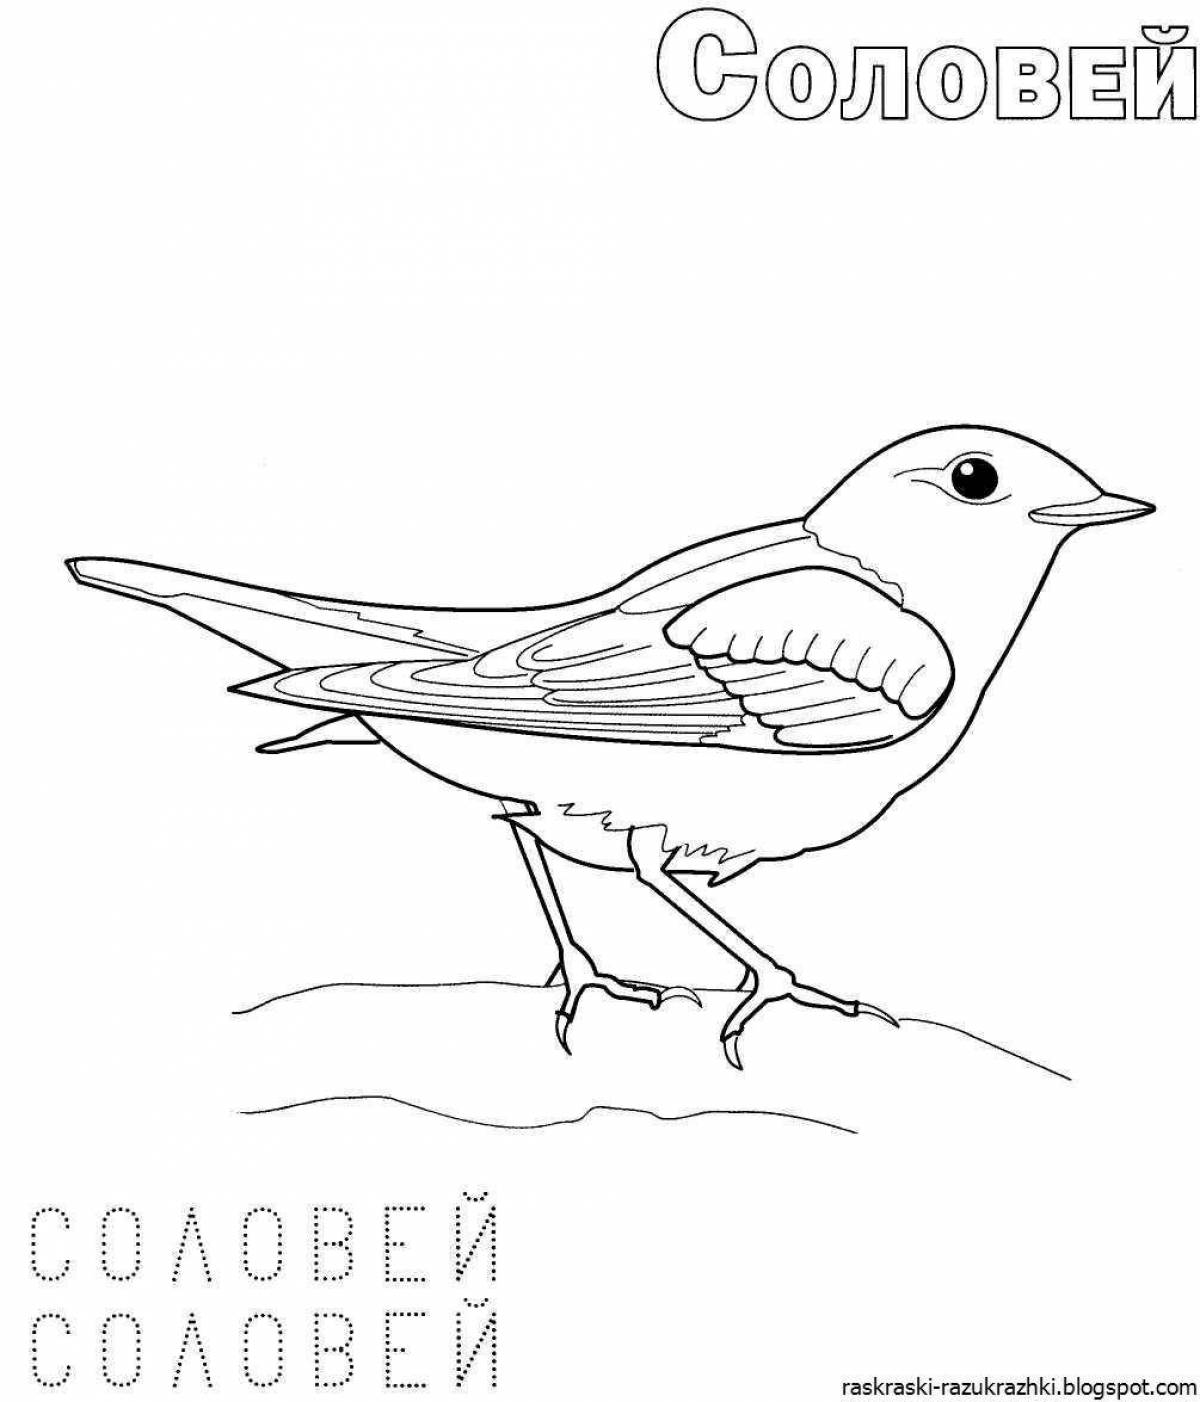 Colorful coloring pages of migratory birds for kids